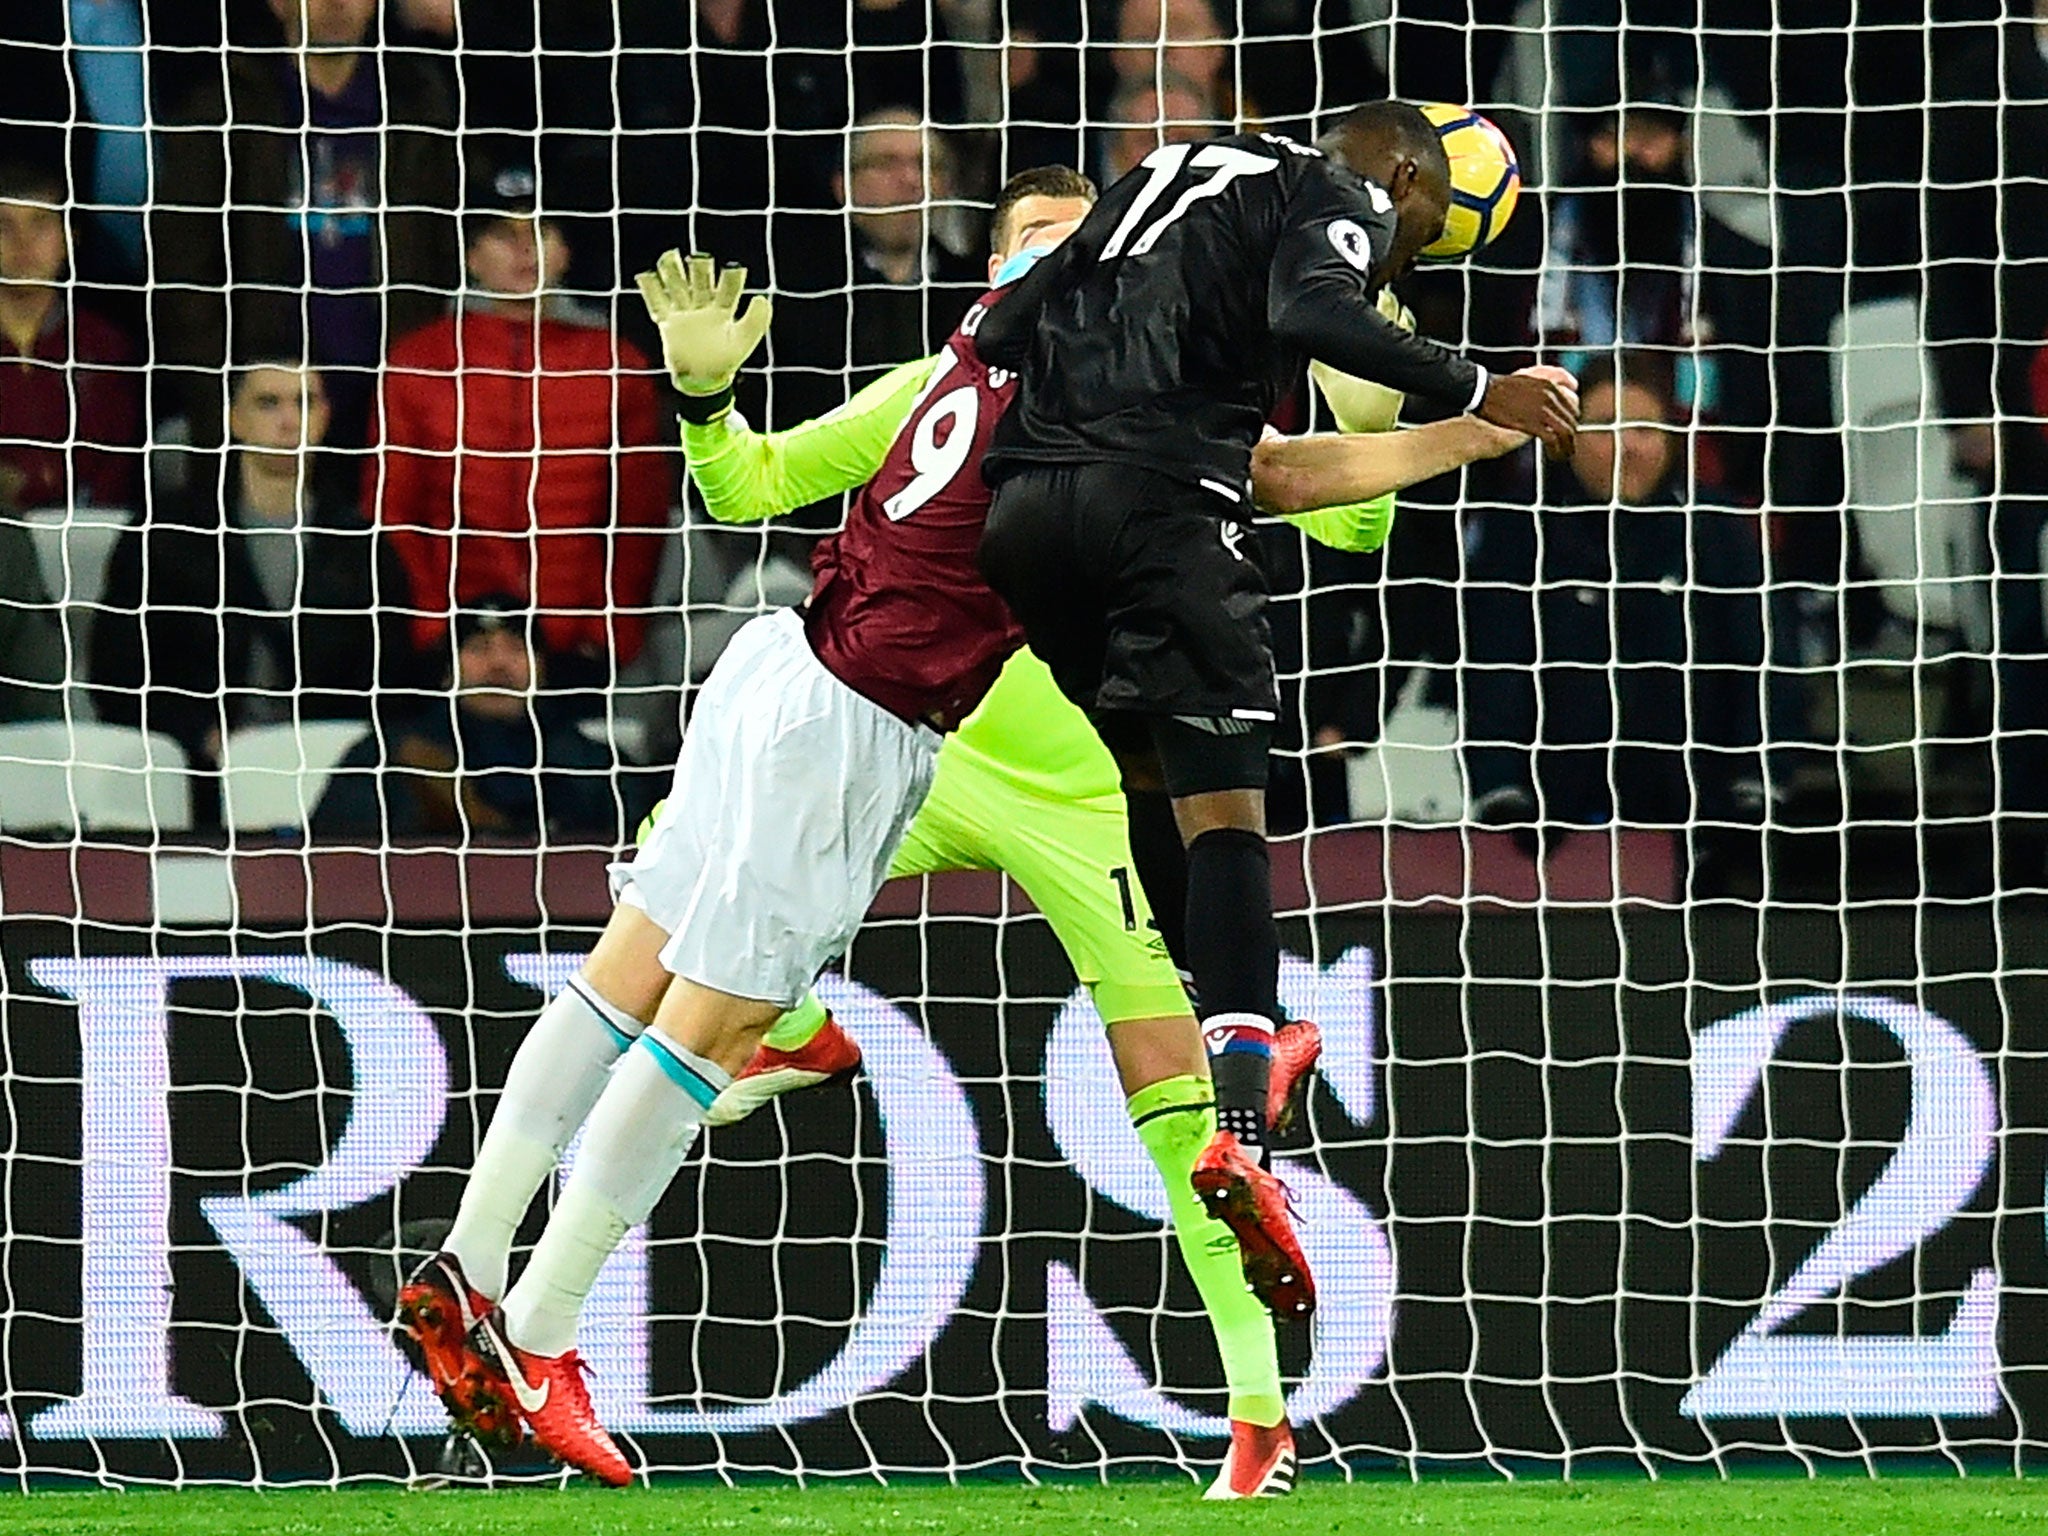 Christian Benteke clinched his second goal of the season with a bullet header